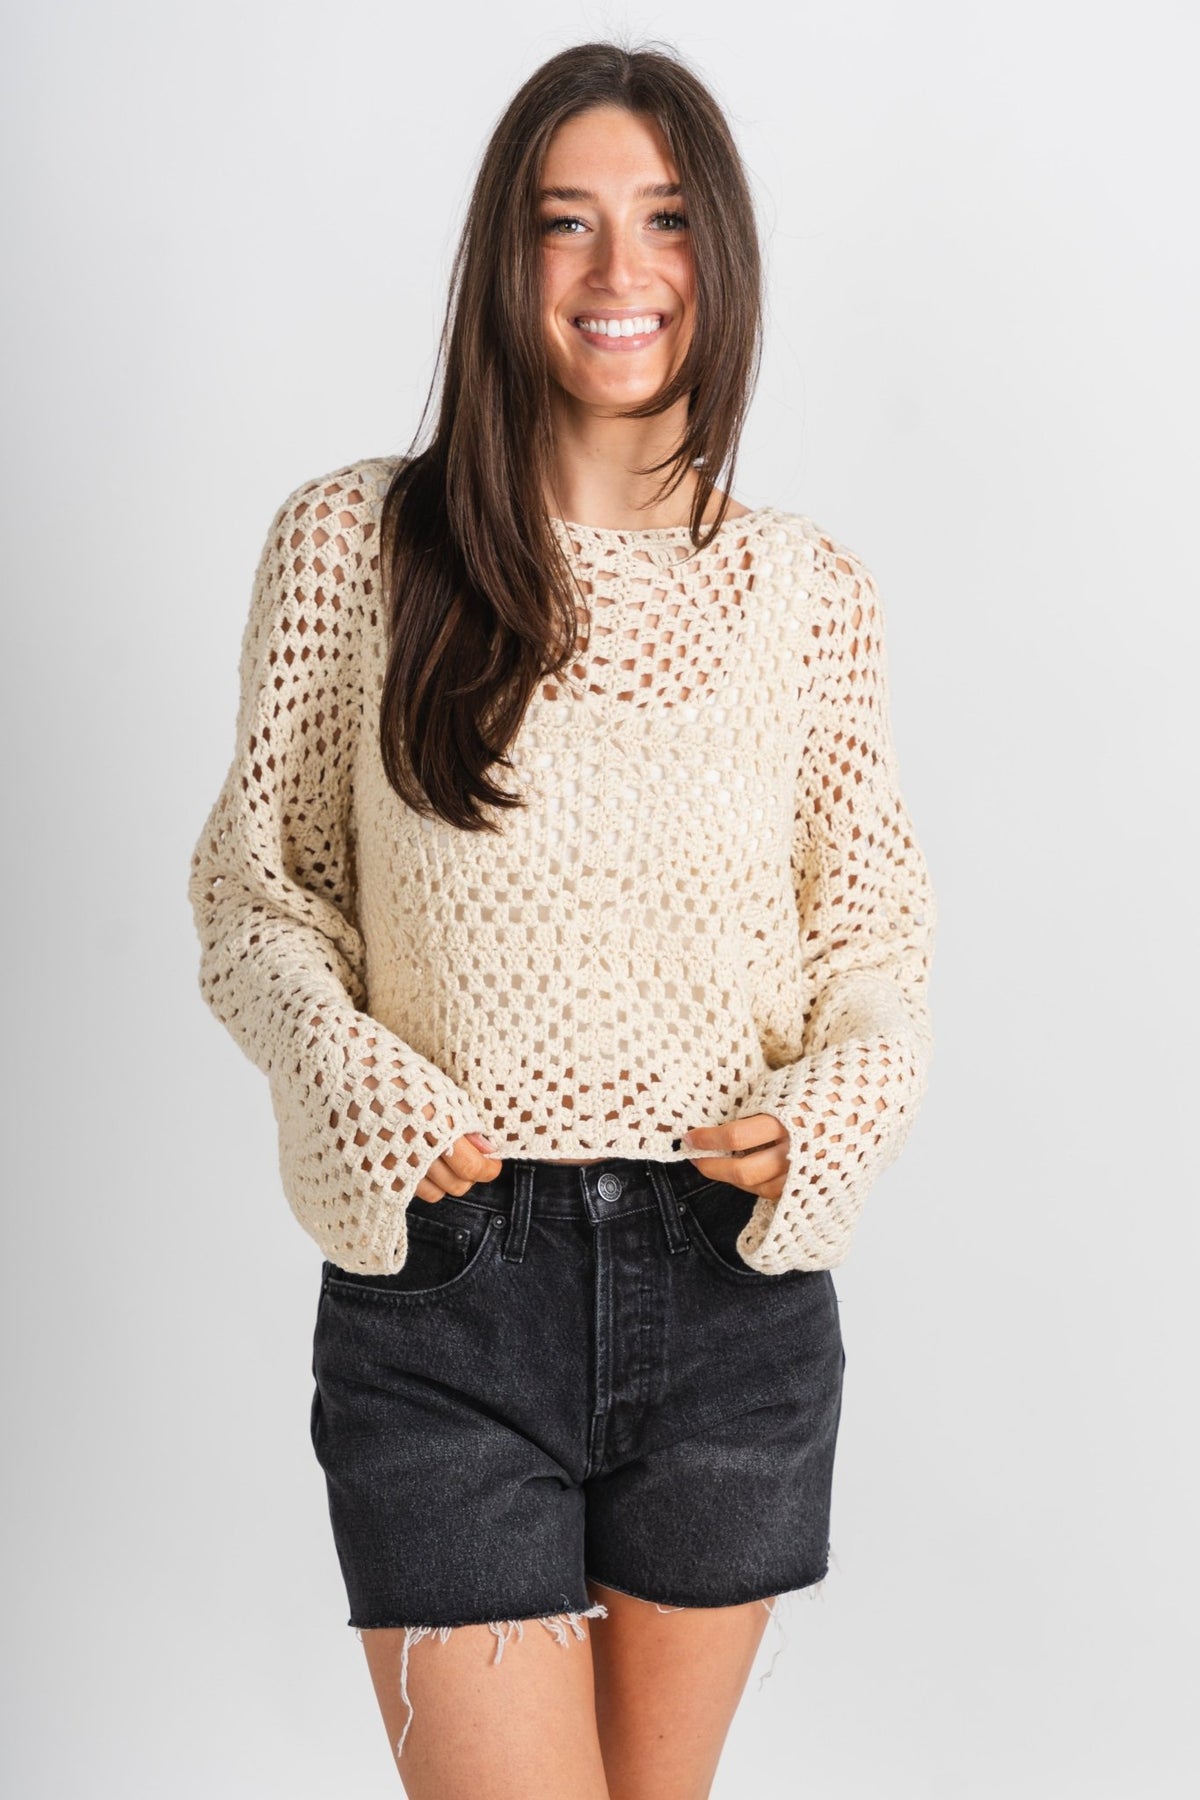 Long sleeve crochet top ivory - Trendy Top - Cute Vacation Collection at Lush Fashion Lounge Boutique in Oklahoma City